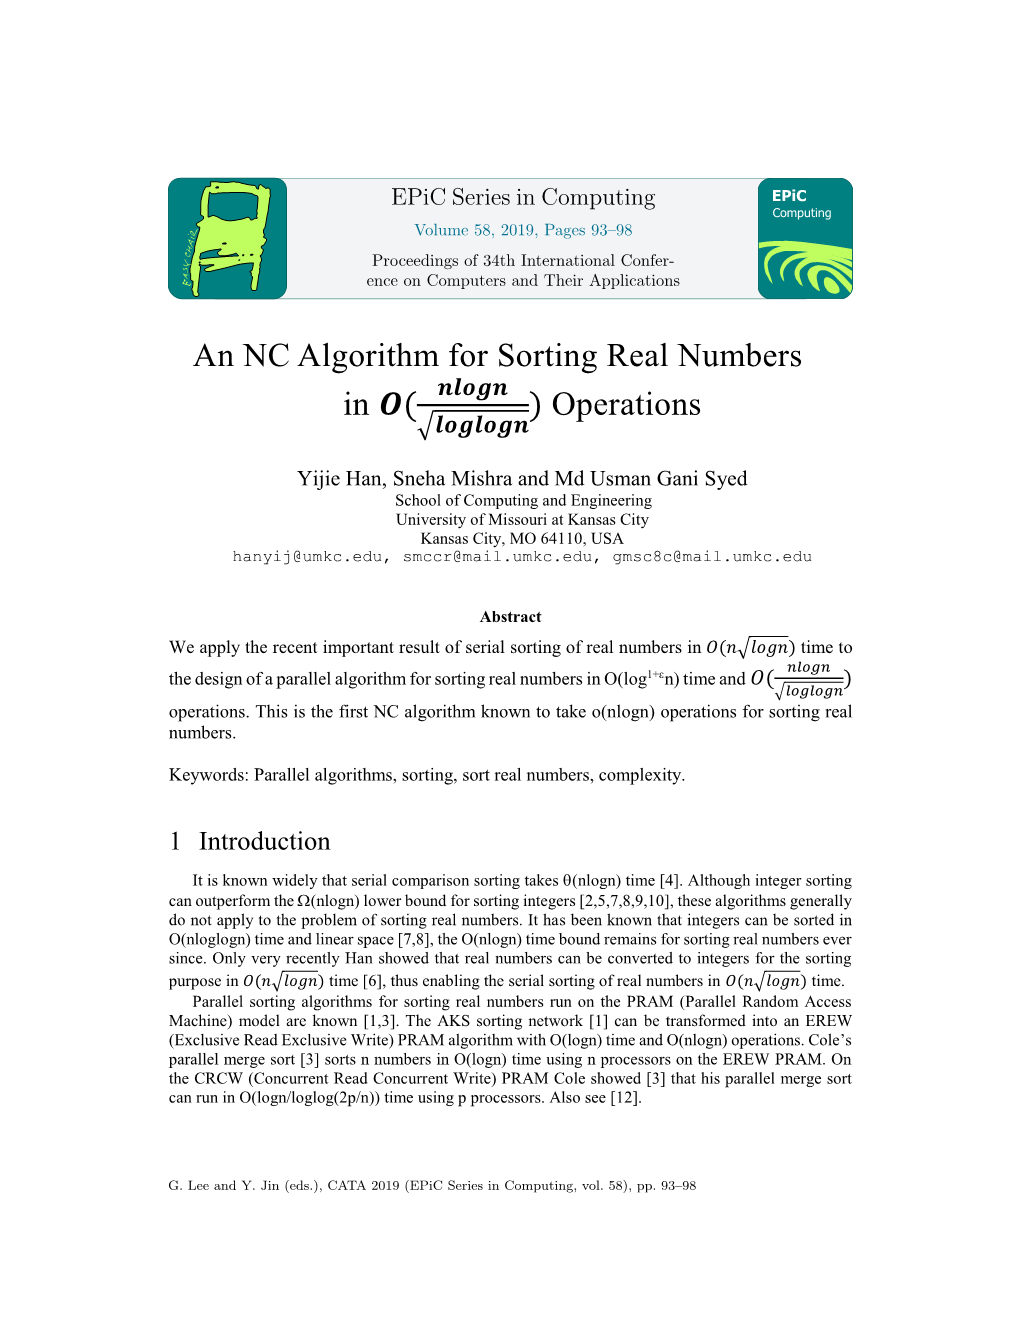 An NC Algorithm for Sorting Real Numbers in ( ) Operations